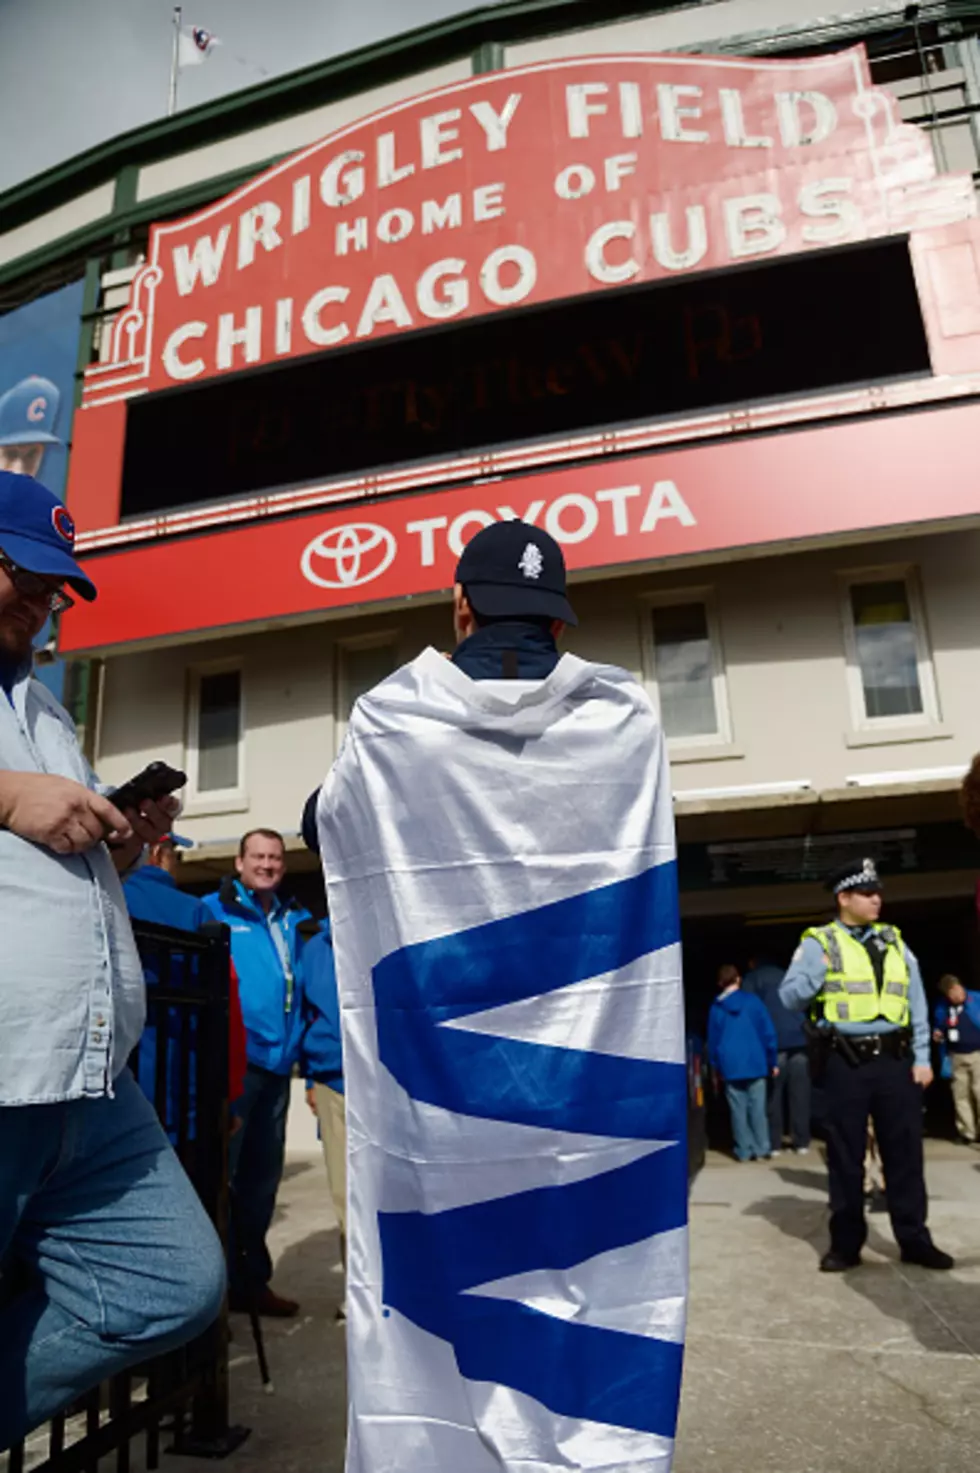 Cubs vs Mets NLCS Ticket Prices Going Through the Roof [Watch]